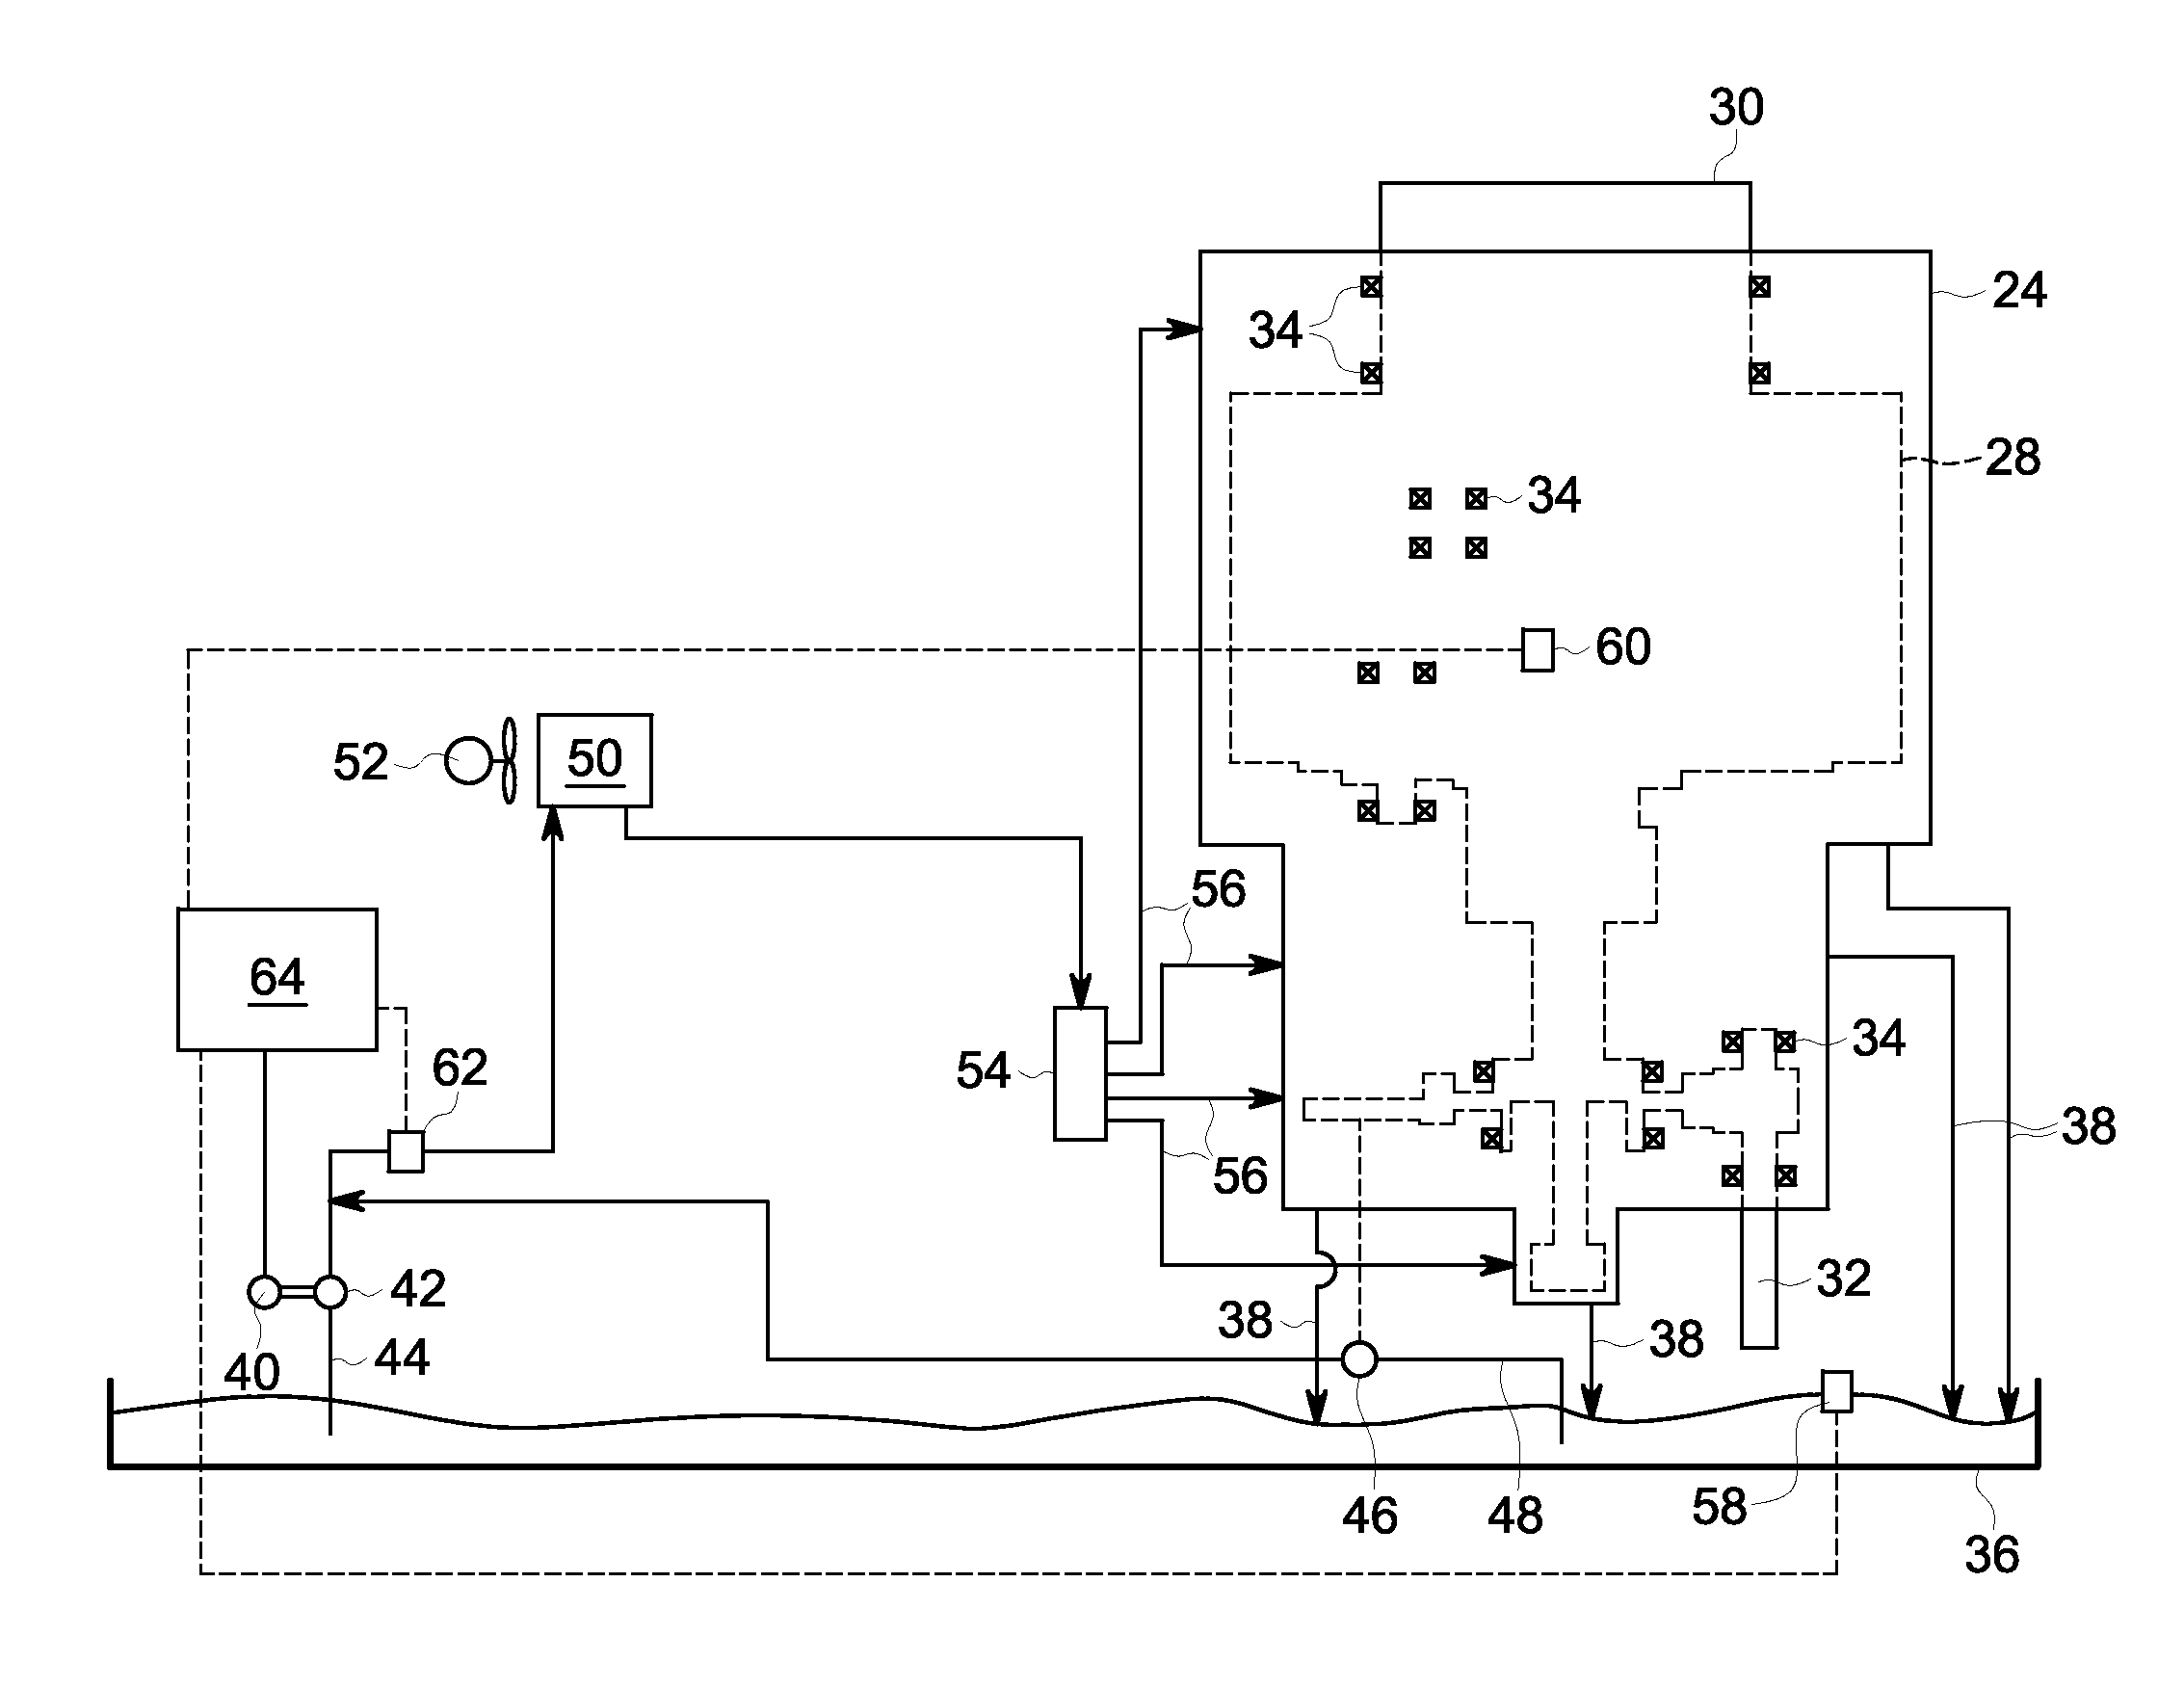 Lubricant supply system and method for controlling gearbox lubrication